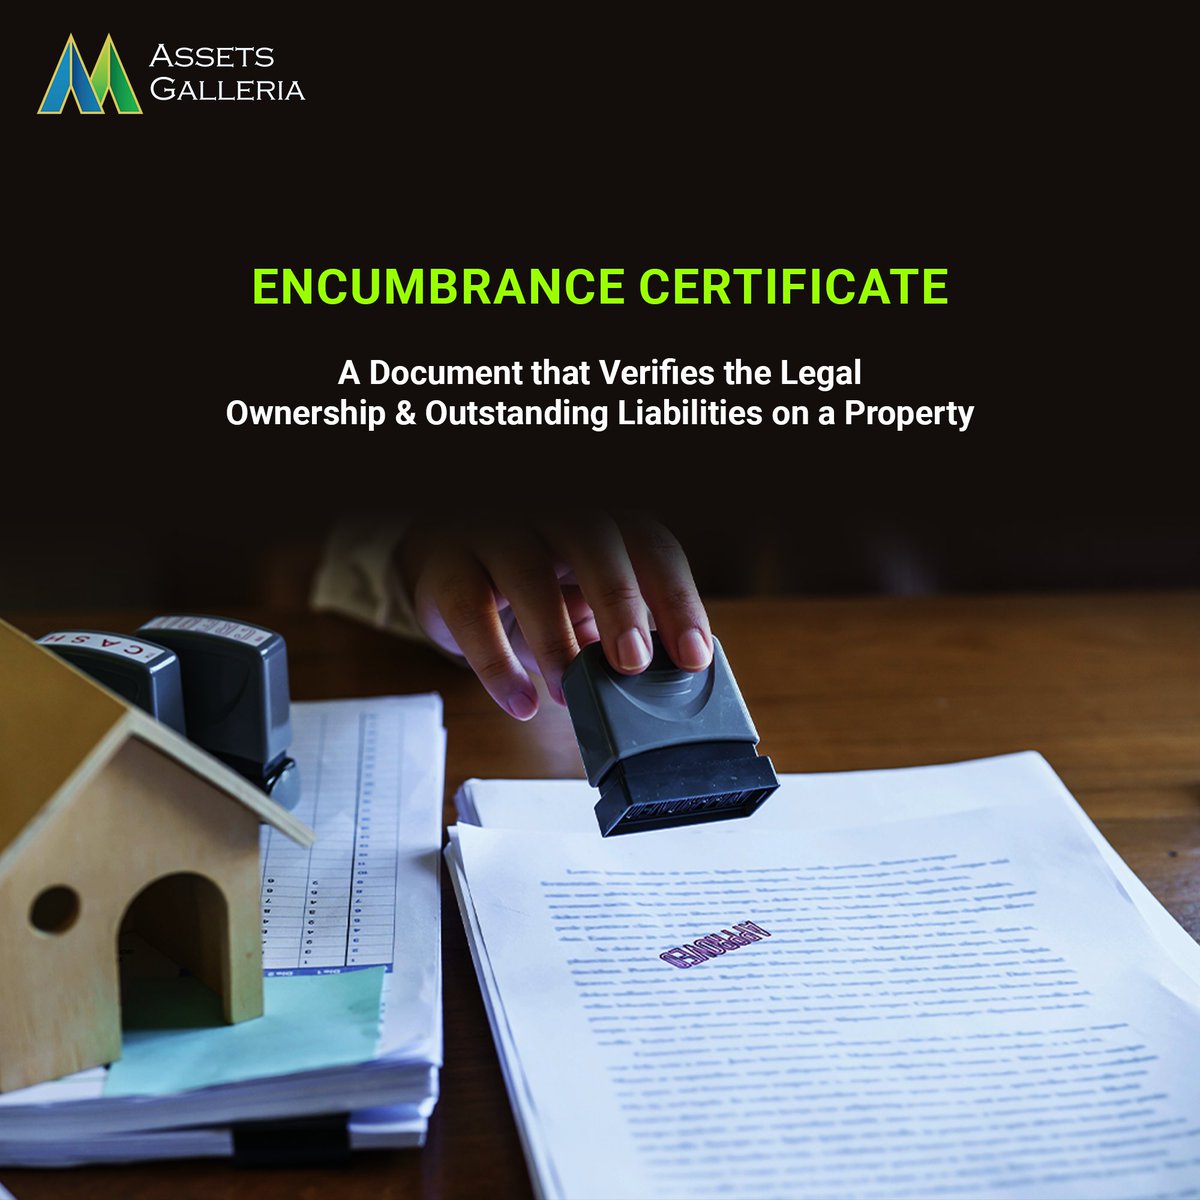 An #EncumbranceCertificate (EC) holds immense significance in #propertytransactions. Encumbrance certificate also verifies outstanding #liabilities, #financial, and #legalcharges on a #property.

#AssetsGalleria #realestate #realestatemarket #newproprty #propertytax #builder